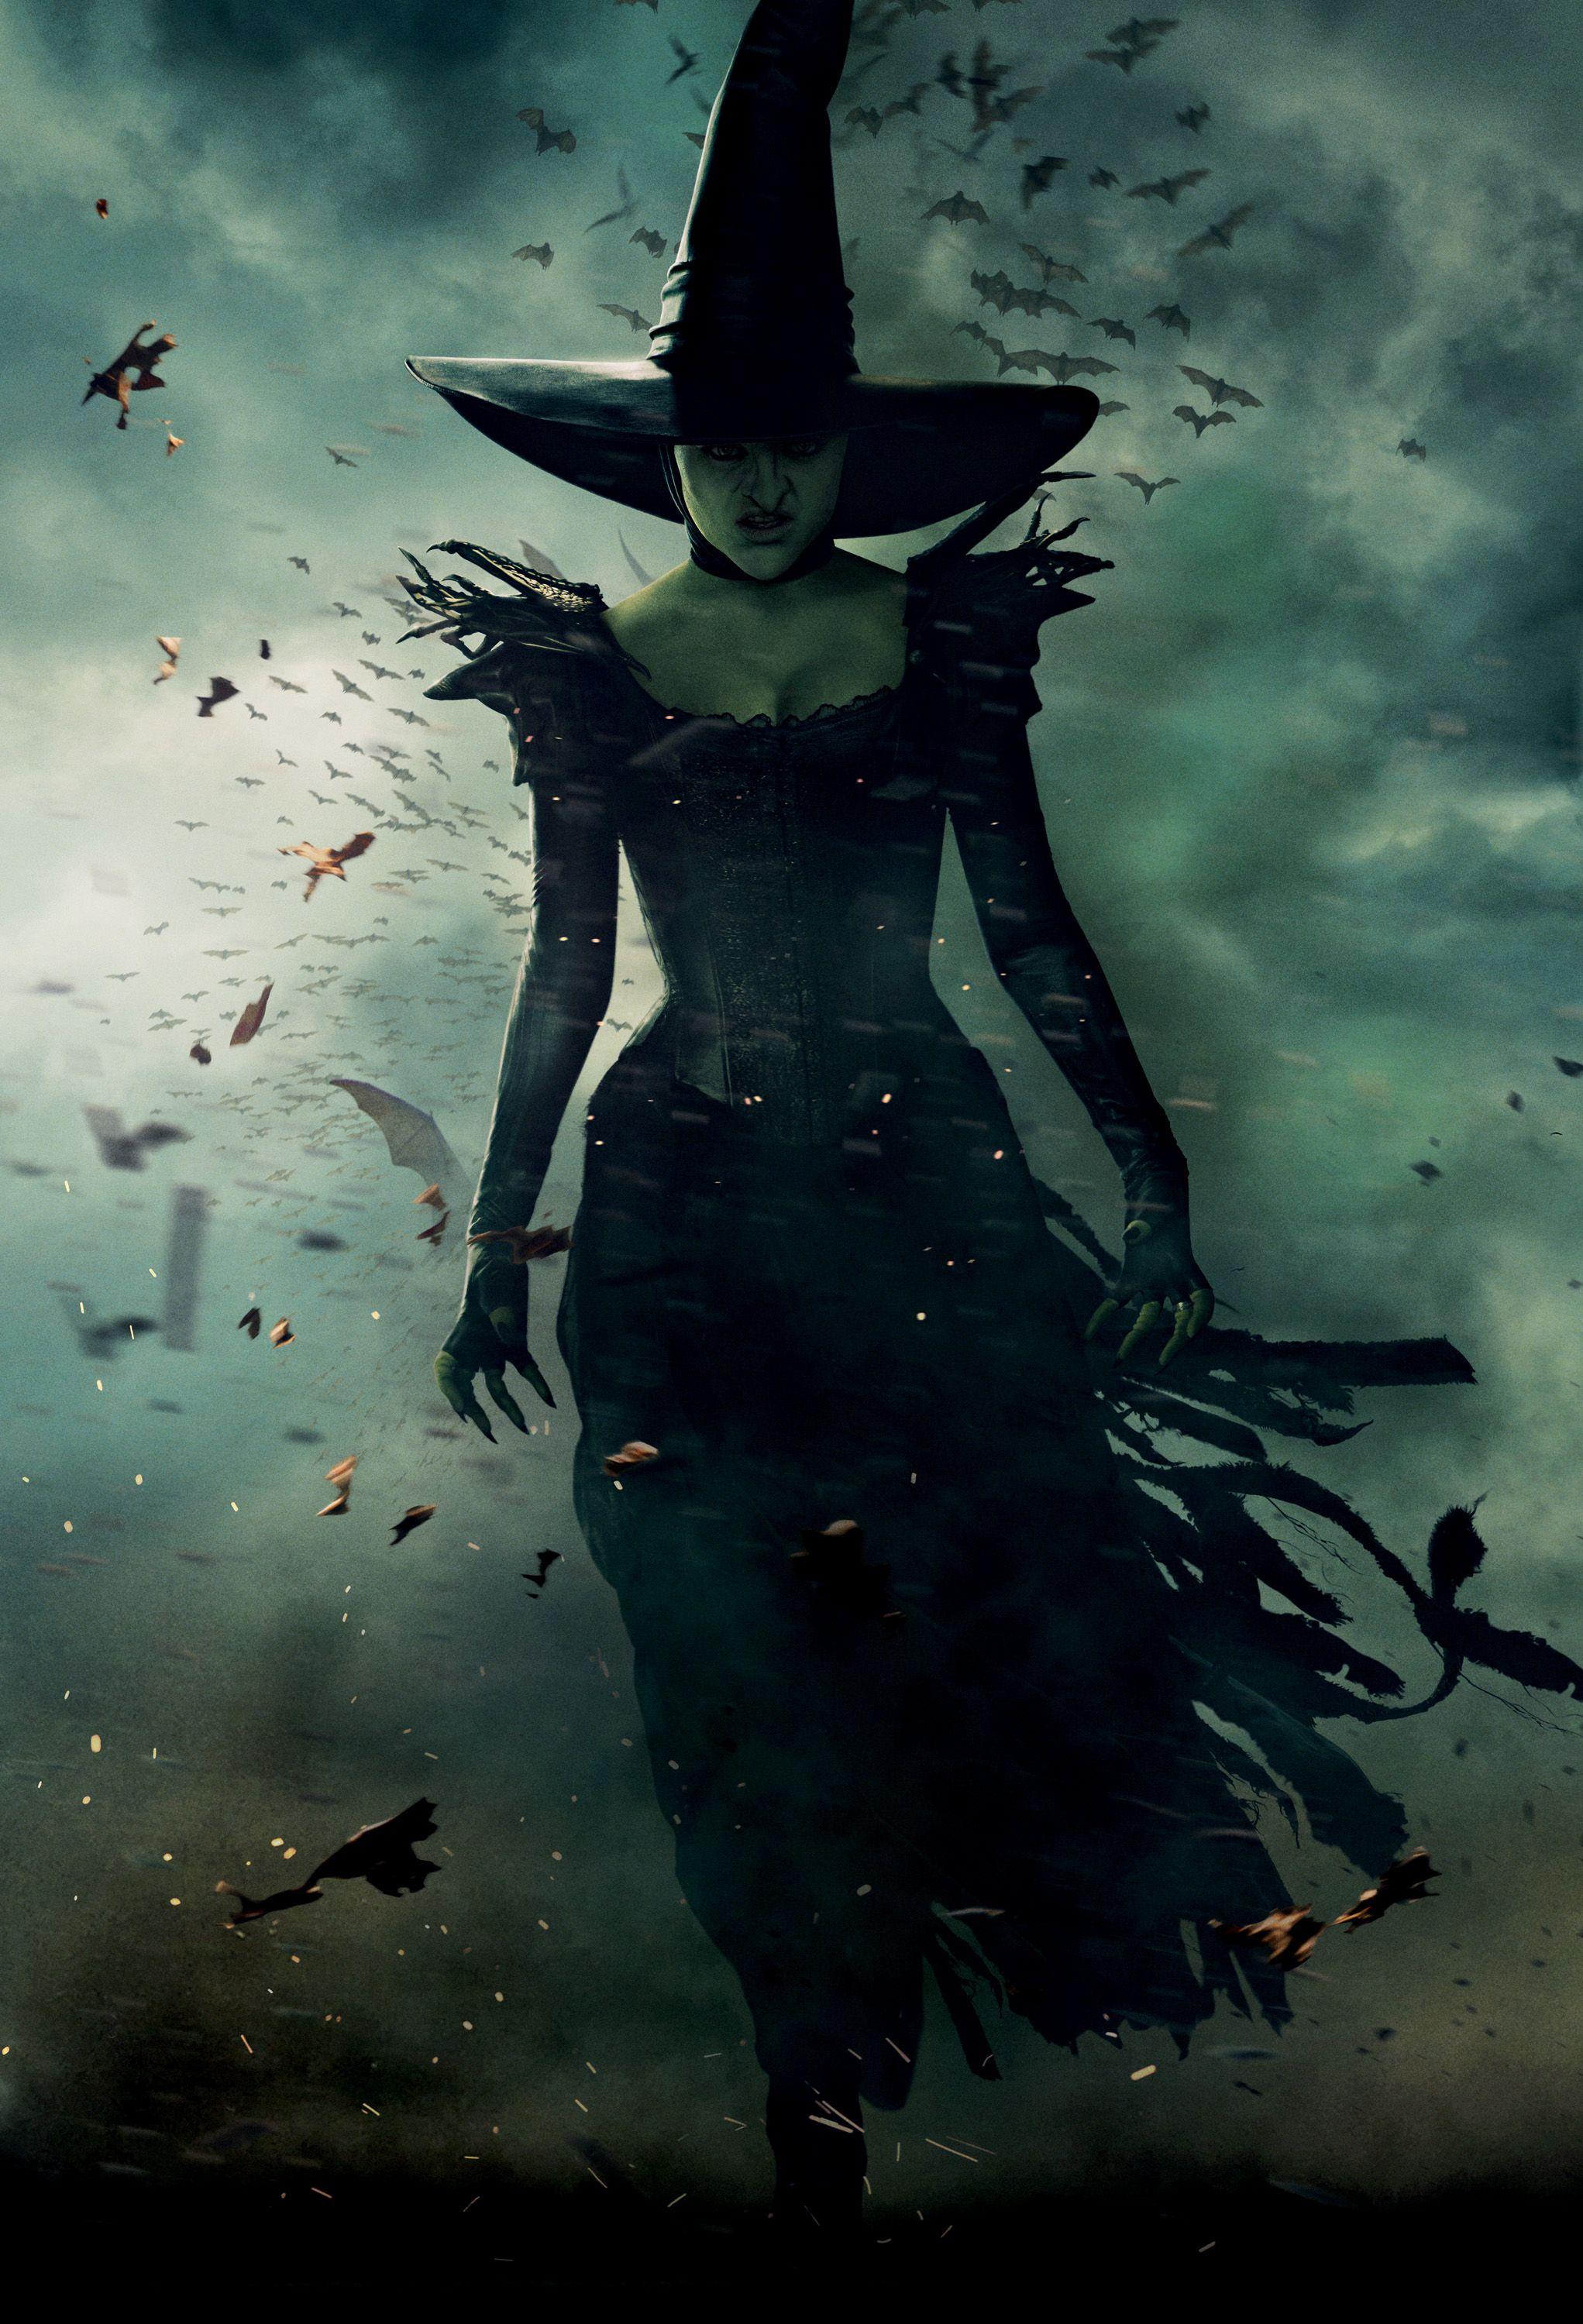 Theodora the Wicked Witch of the